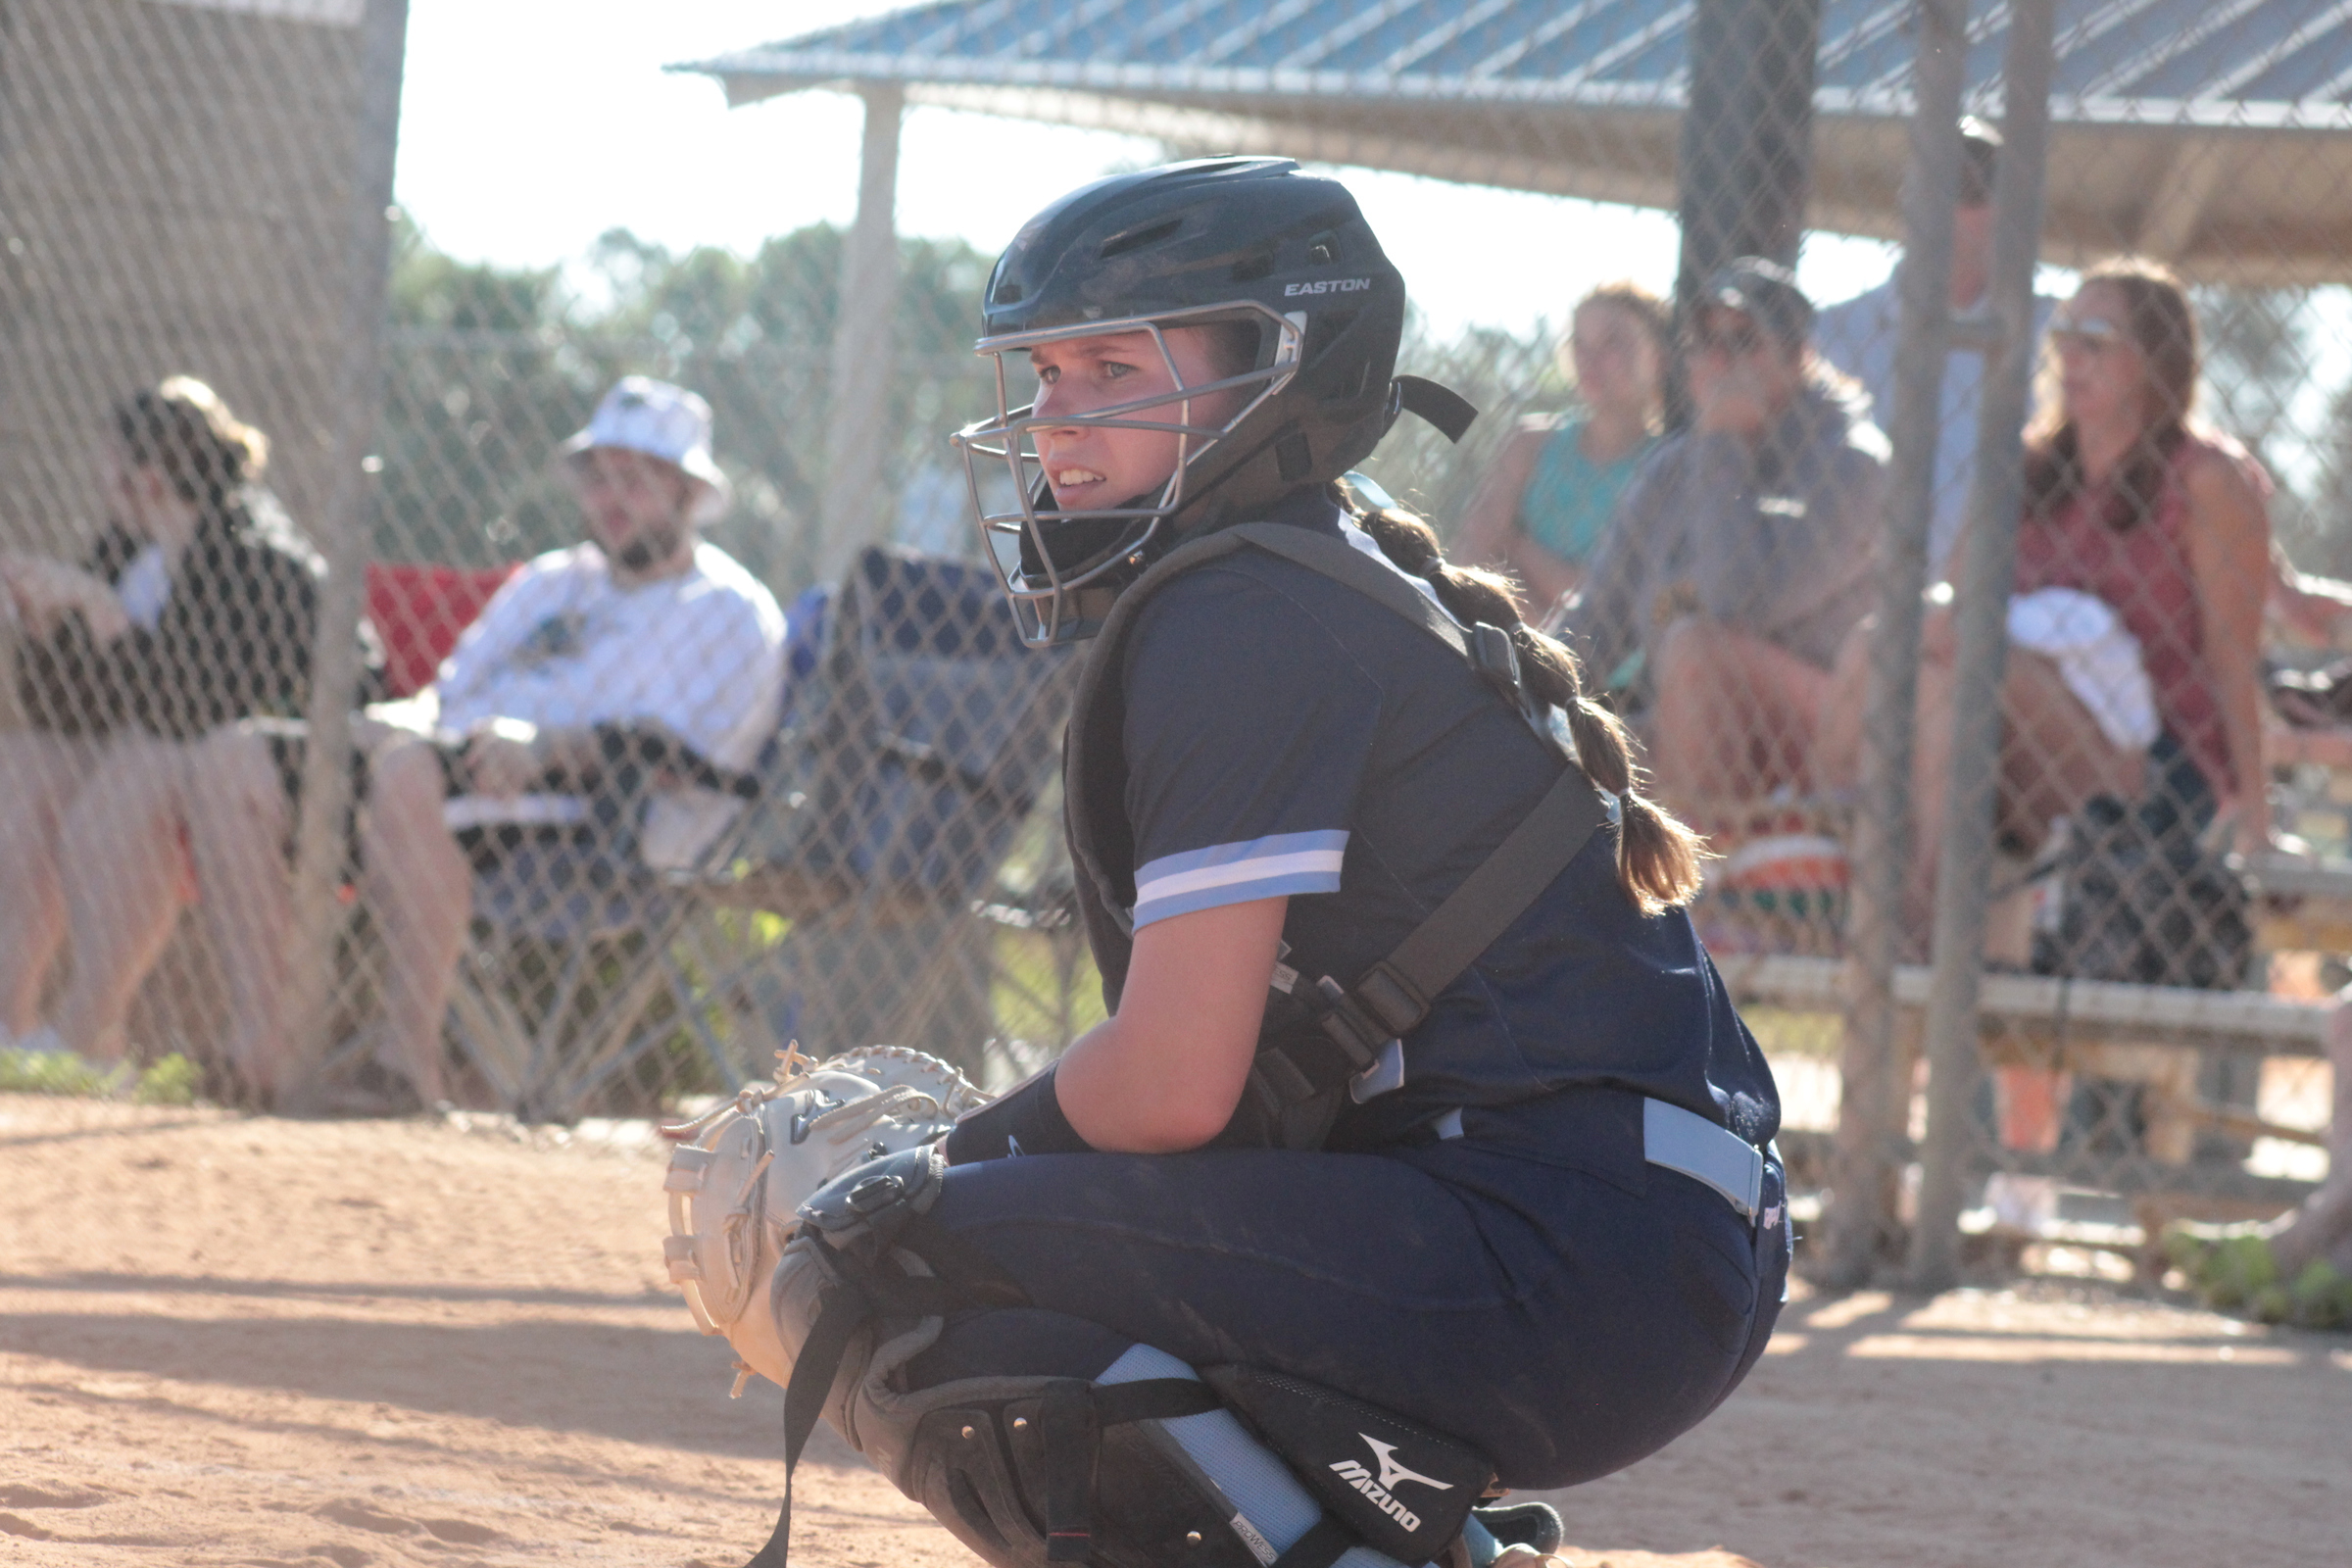 SB: Lasers Lose Two One Run Games to Simmons